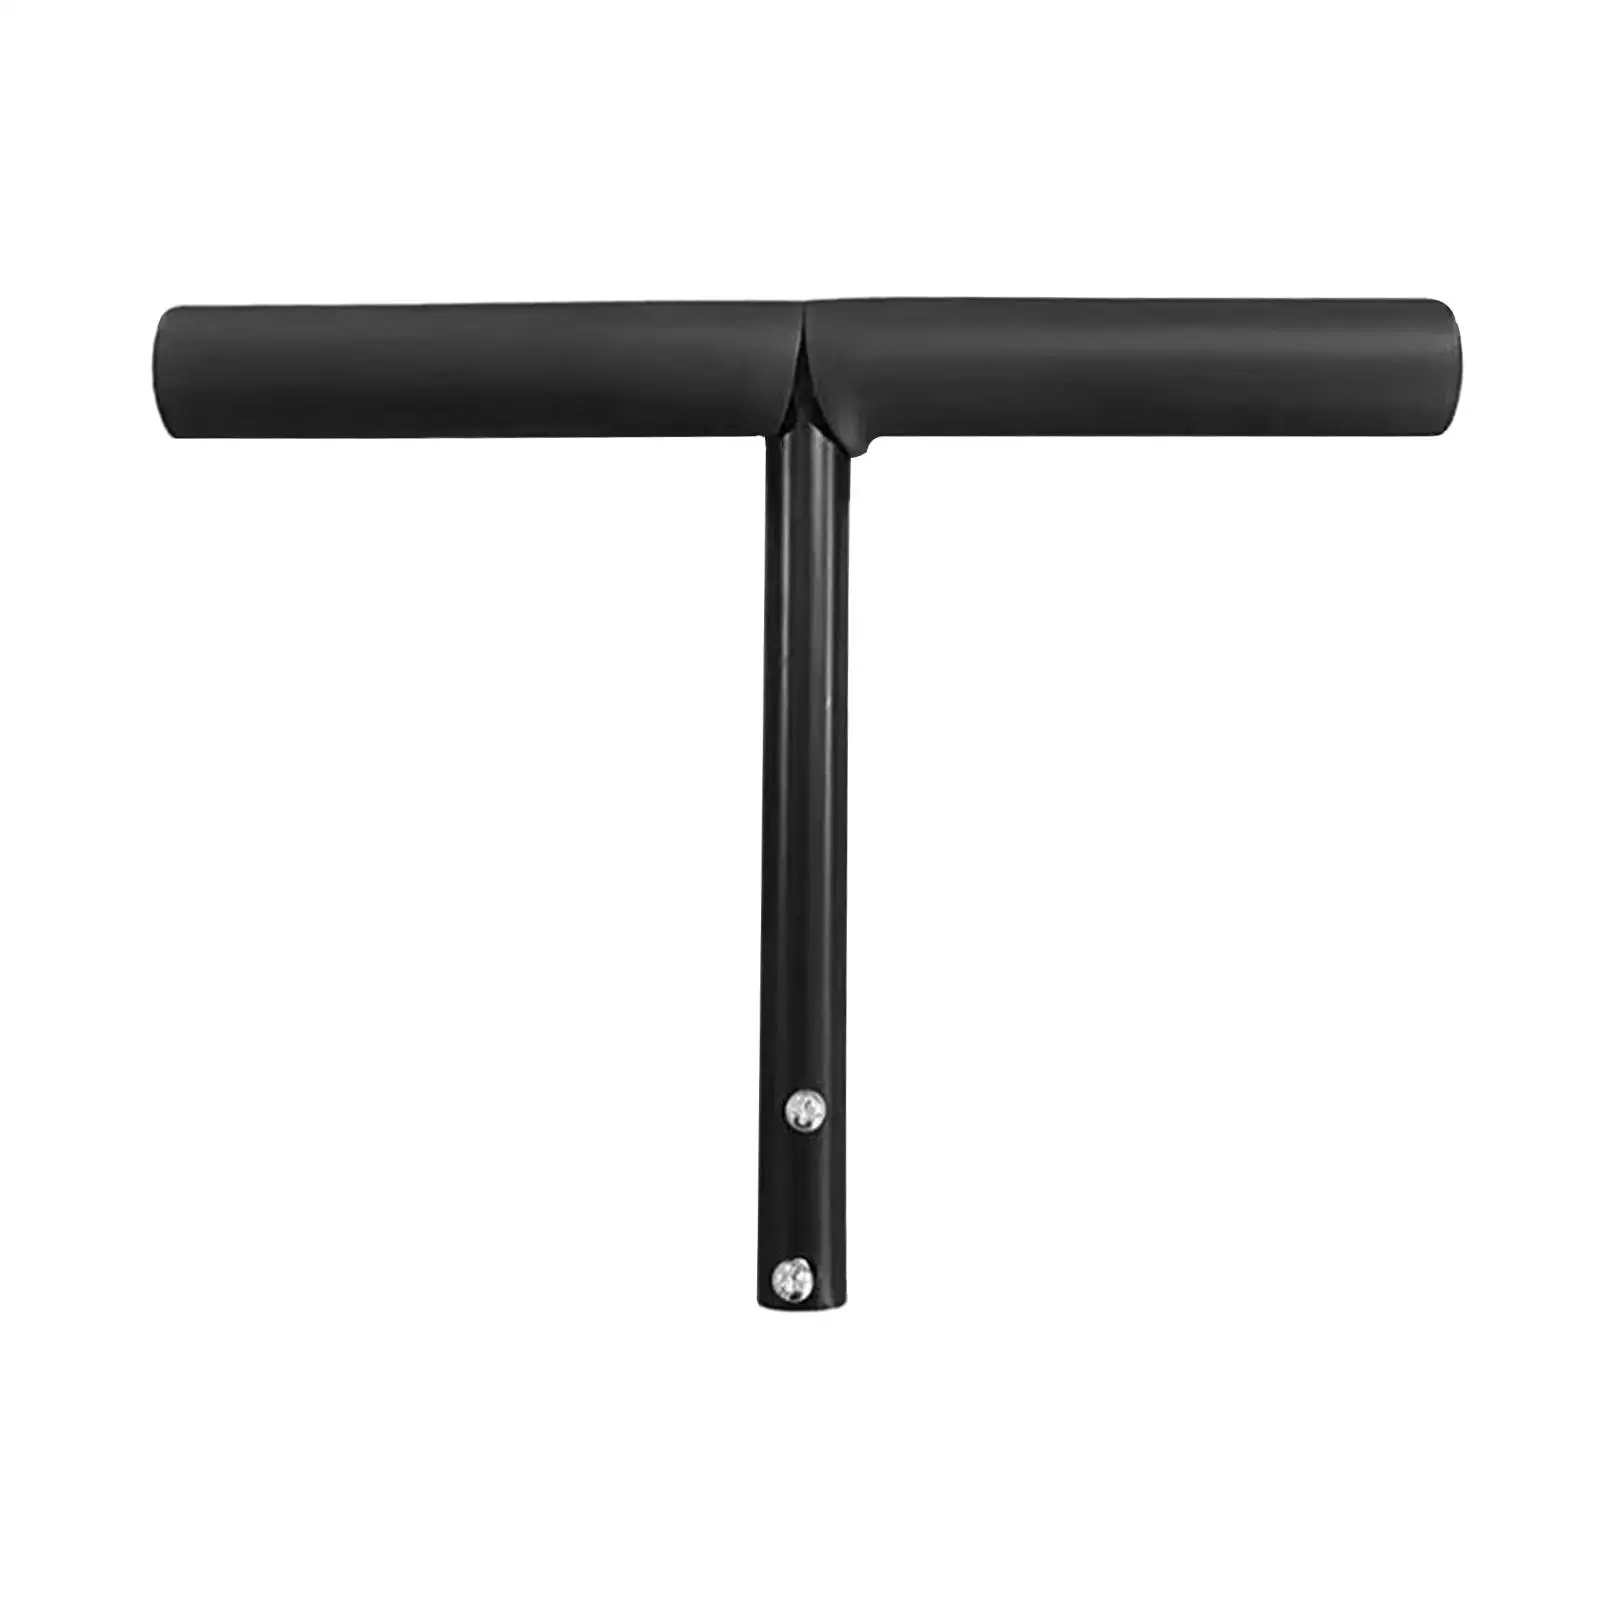 T Shaped Push Handle Bar Practical Baby Bike Accessory for Travel Outdoor